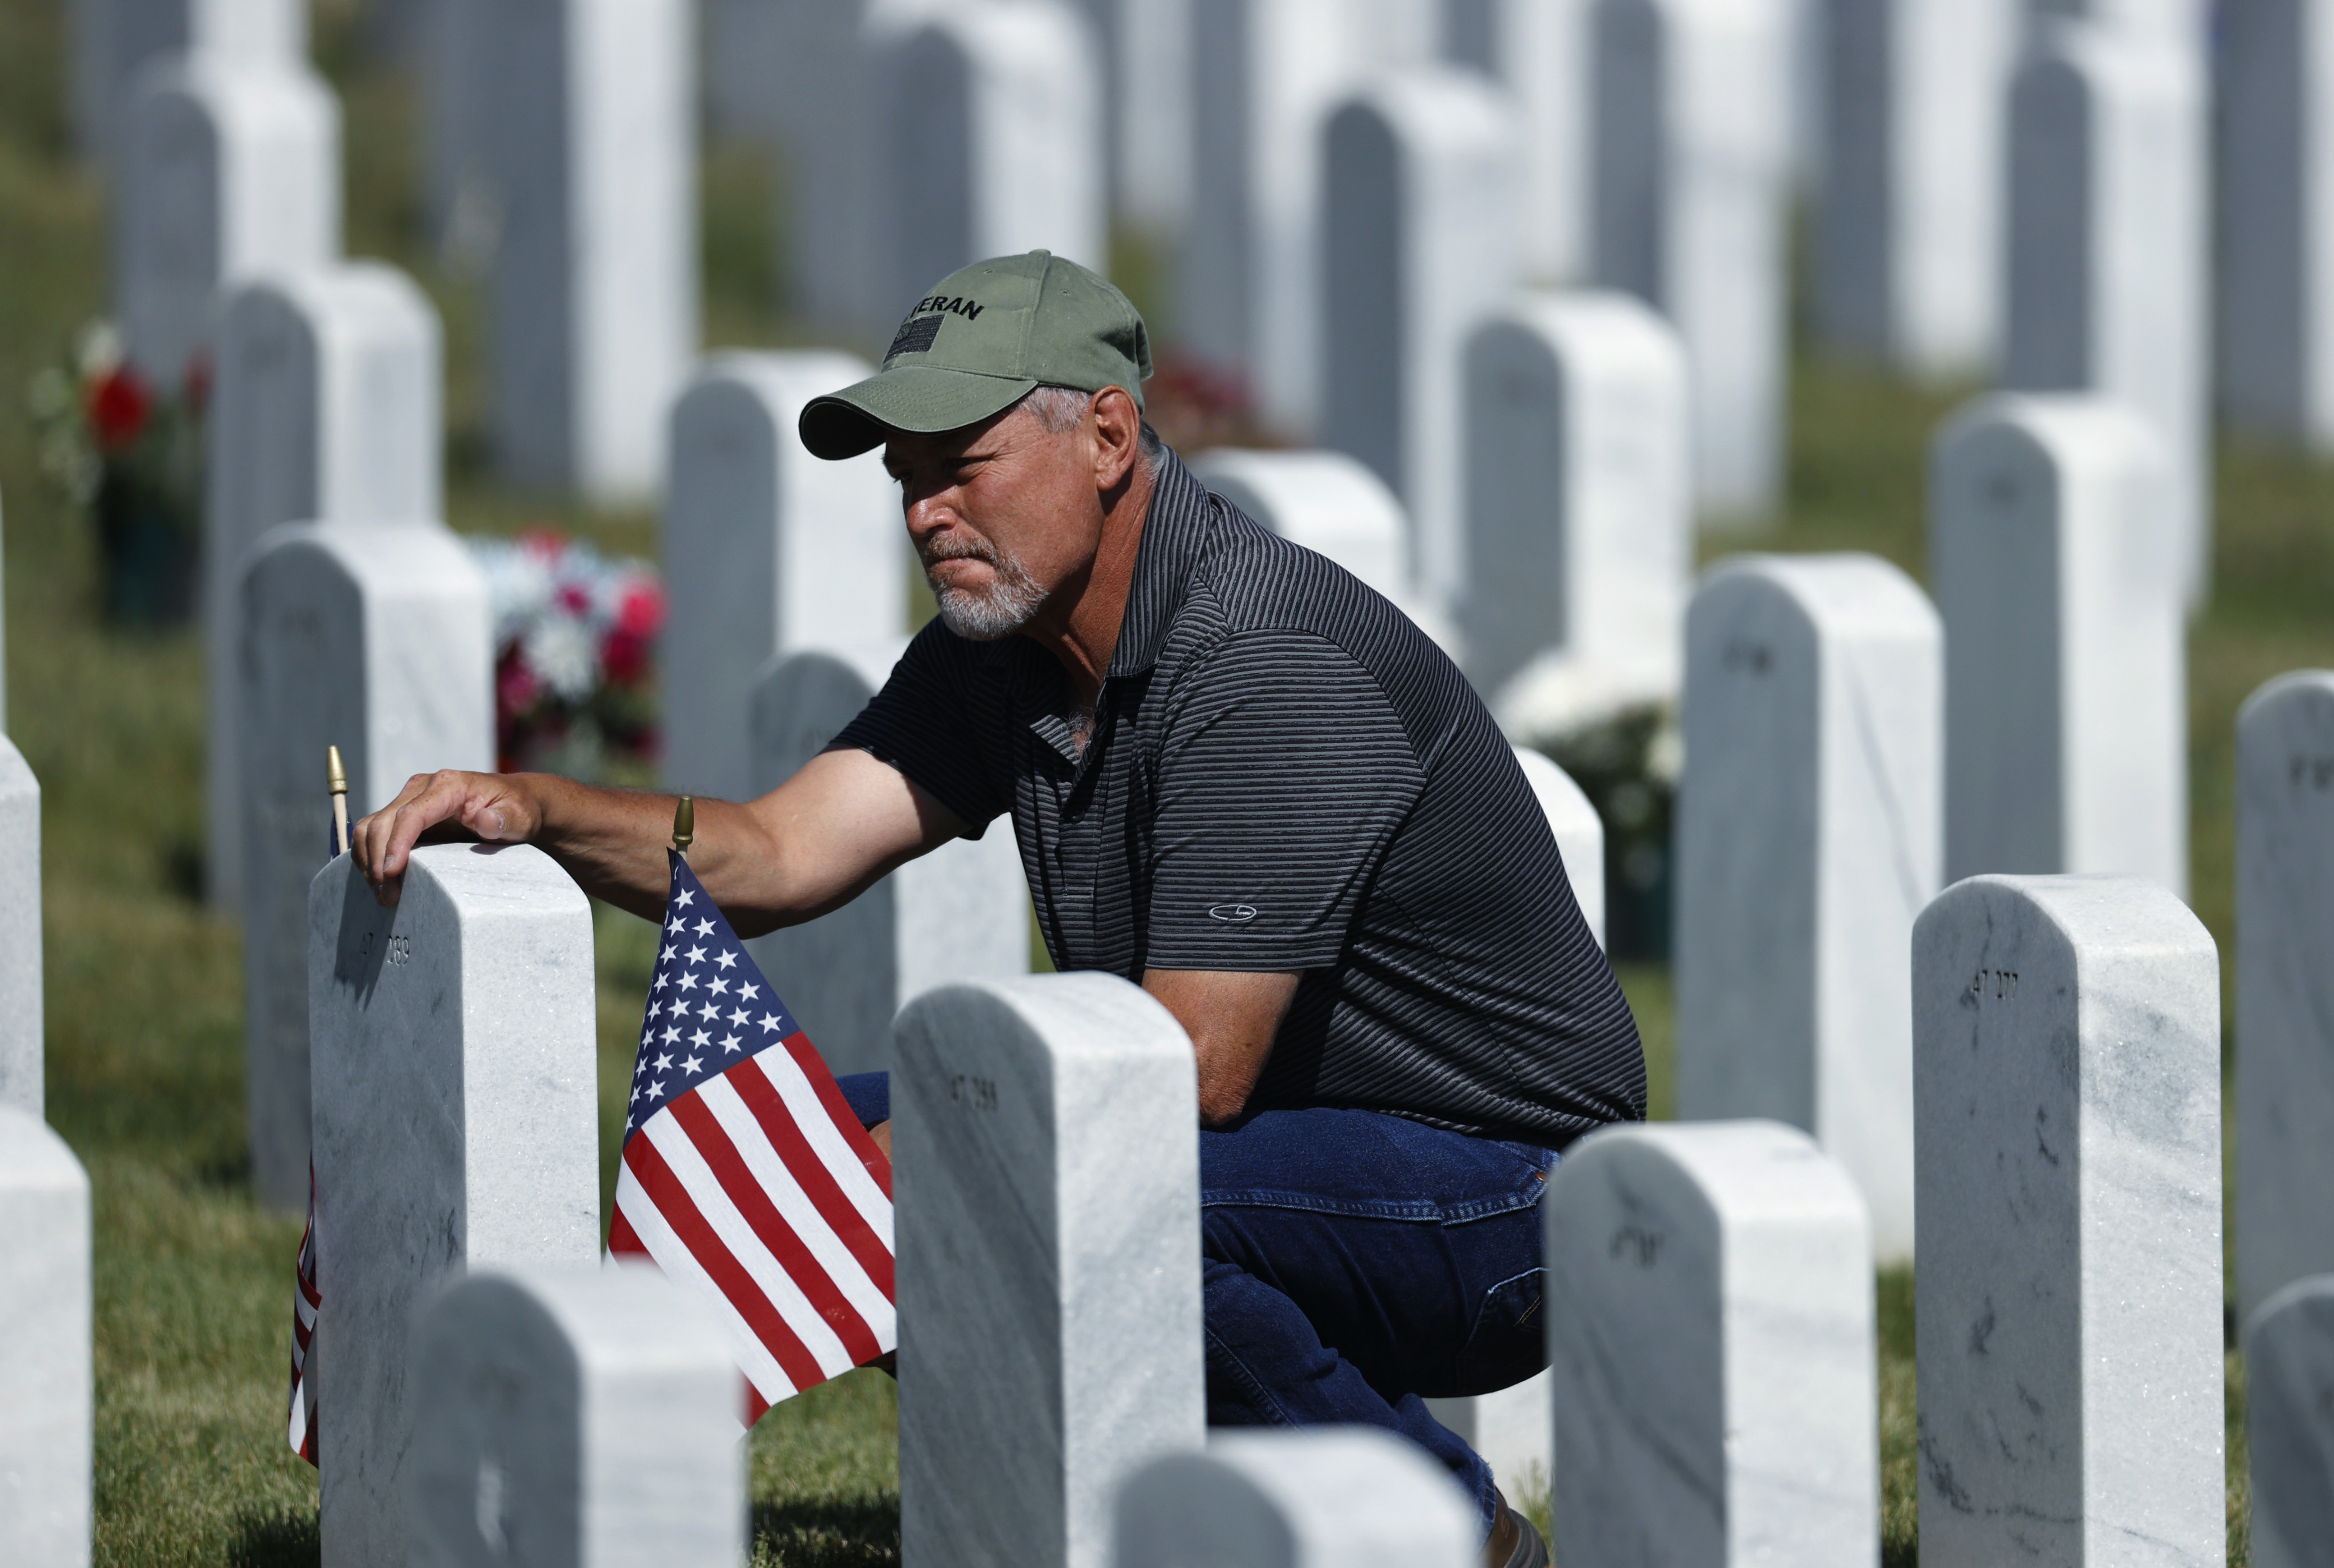 J.D. Madrid pauses to pay tribute at the grave of his father-in-law, Michael McBrien, at Fort Logan National Cemetery on Memorial Day